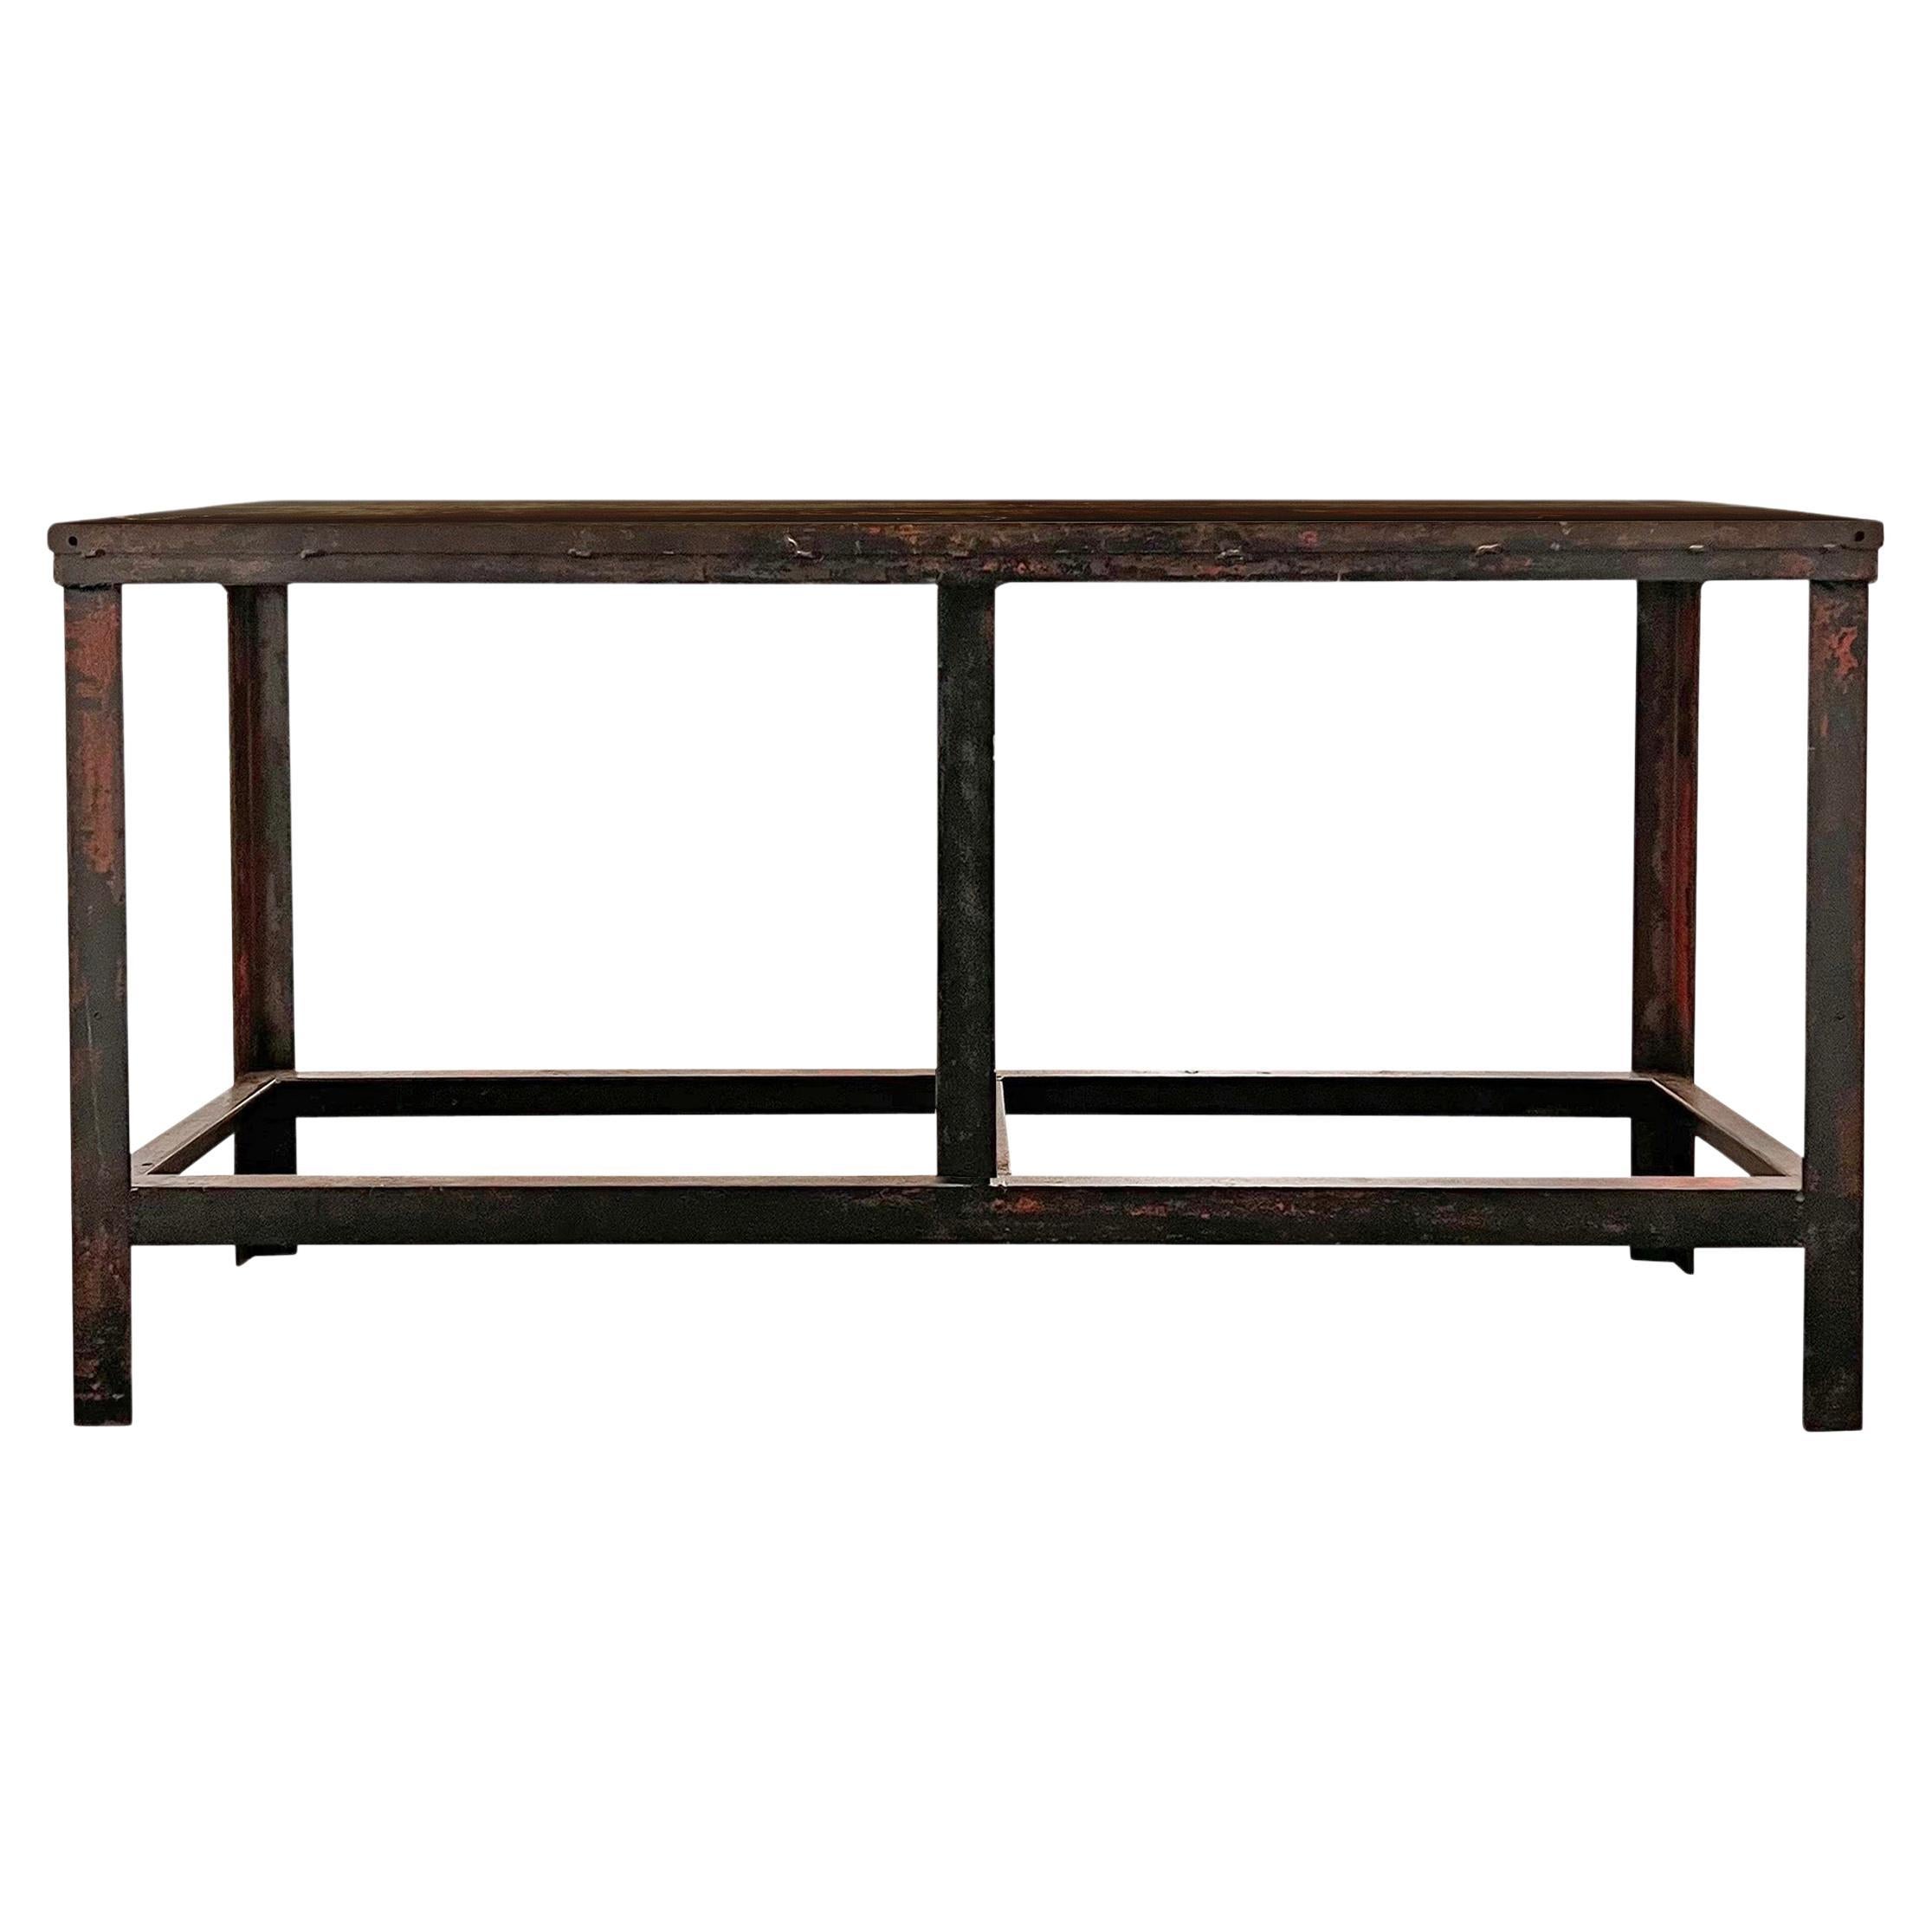 Early 20th Century American Industrial Console Table